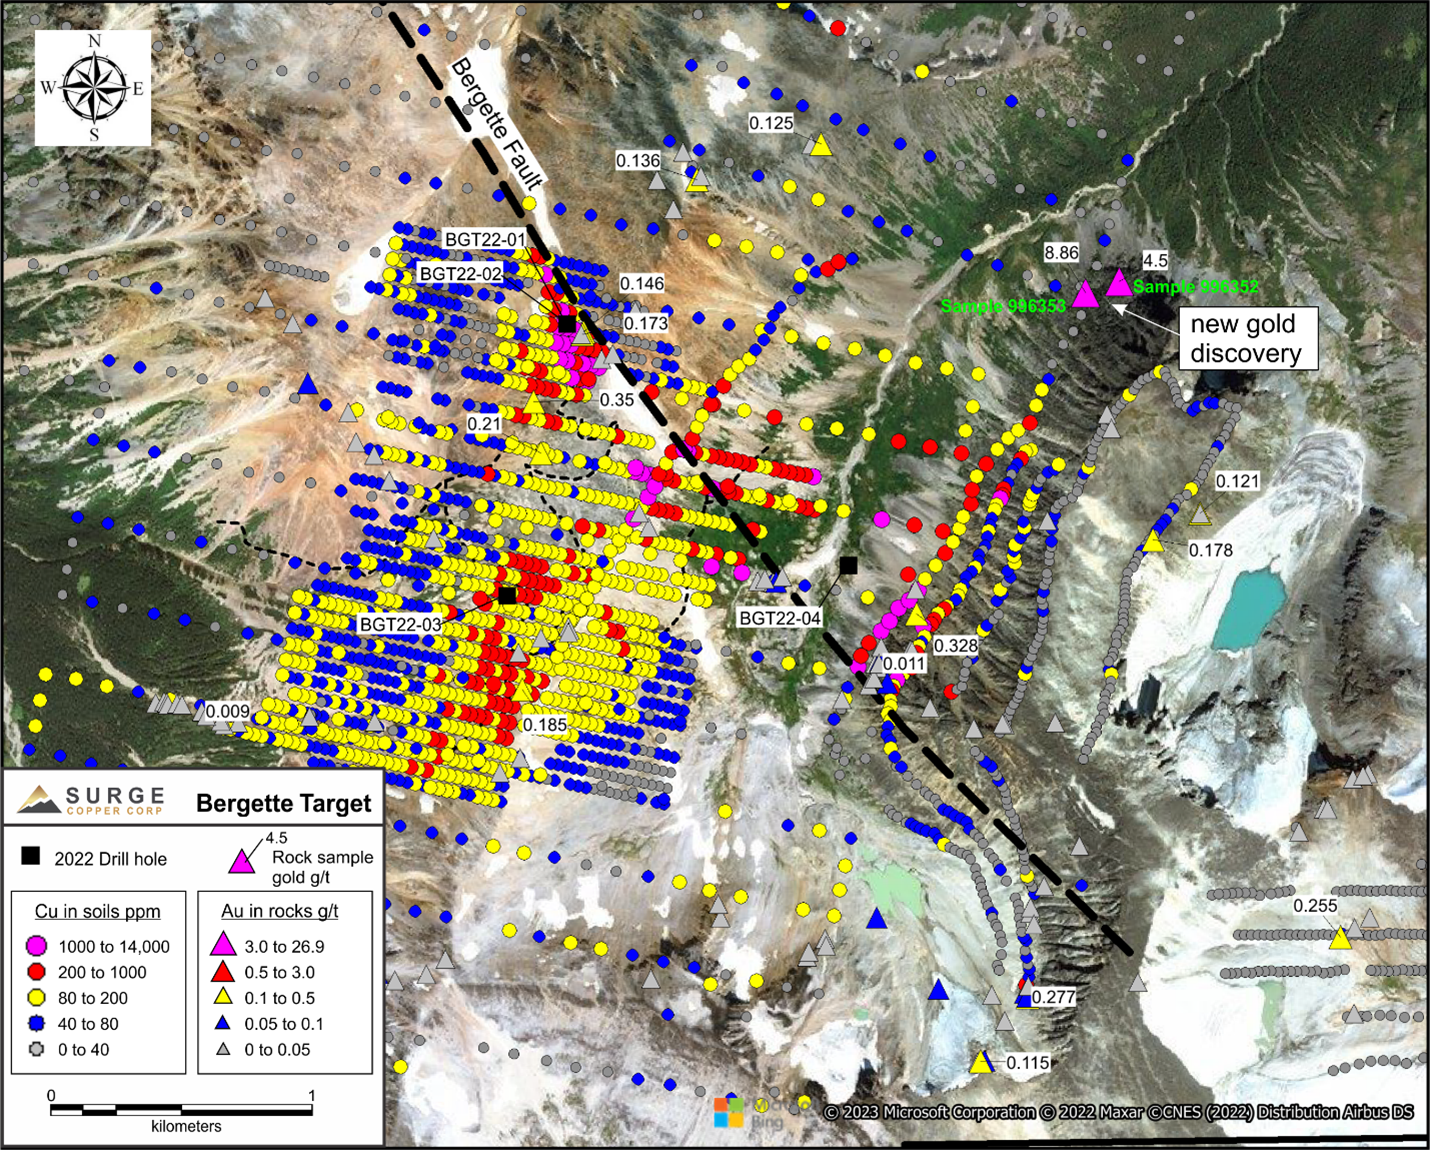 Map showing copper-in-soil and gold-in-rocks from the Bergette Target along with locations of 2022 drilling.